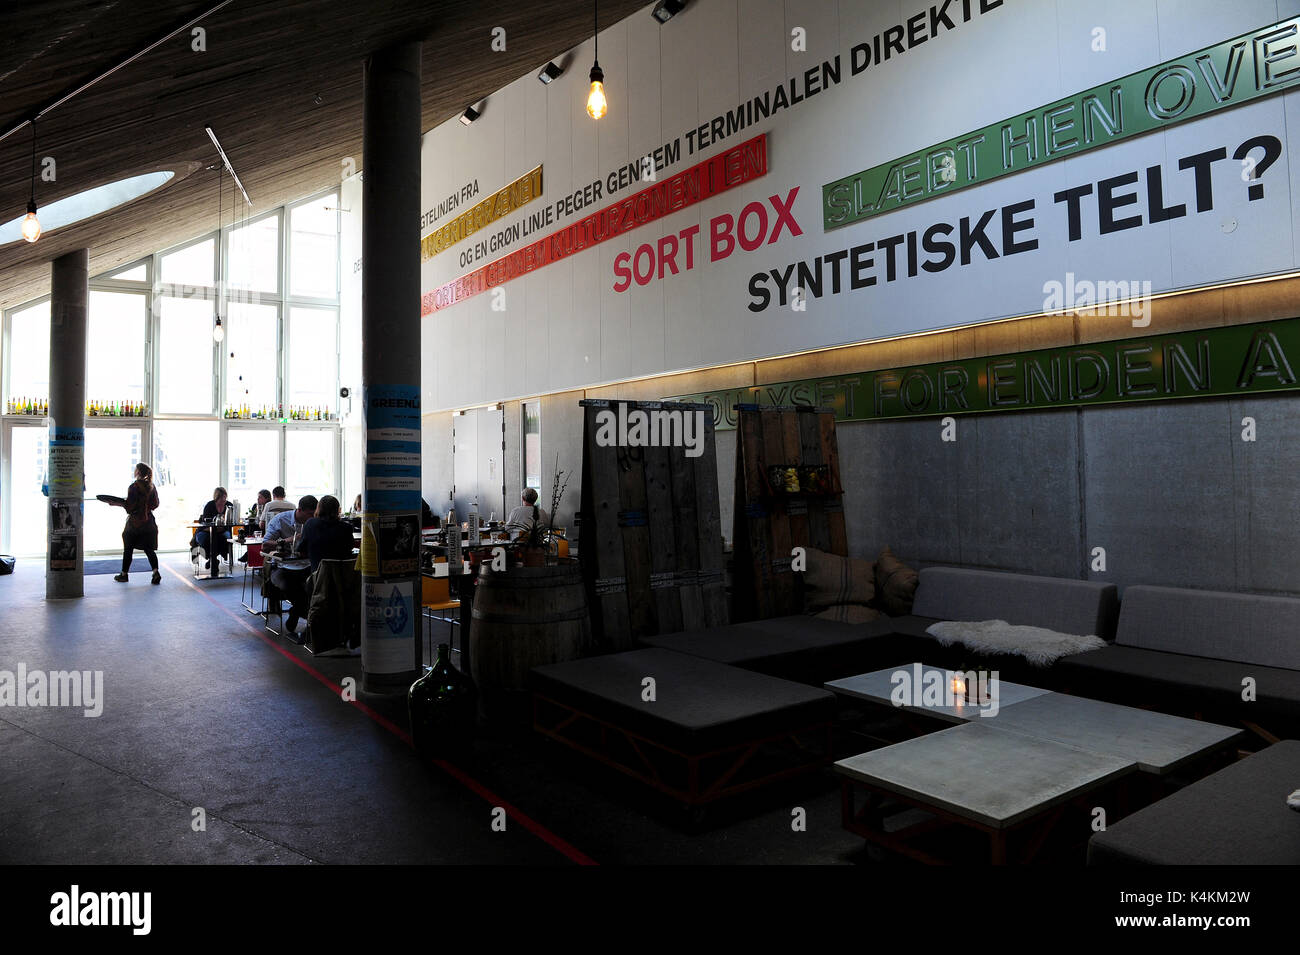 The cafe in Godsbanen, a centre for cultural production in Aarhus, Denmark. Stock Photo